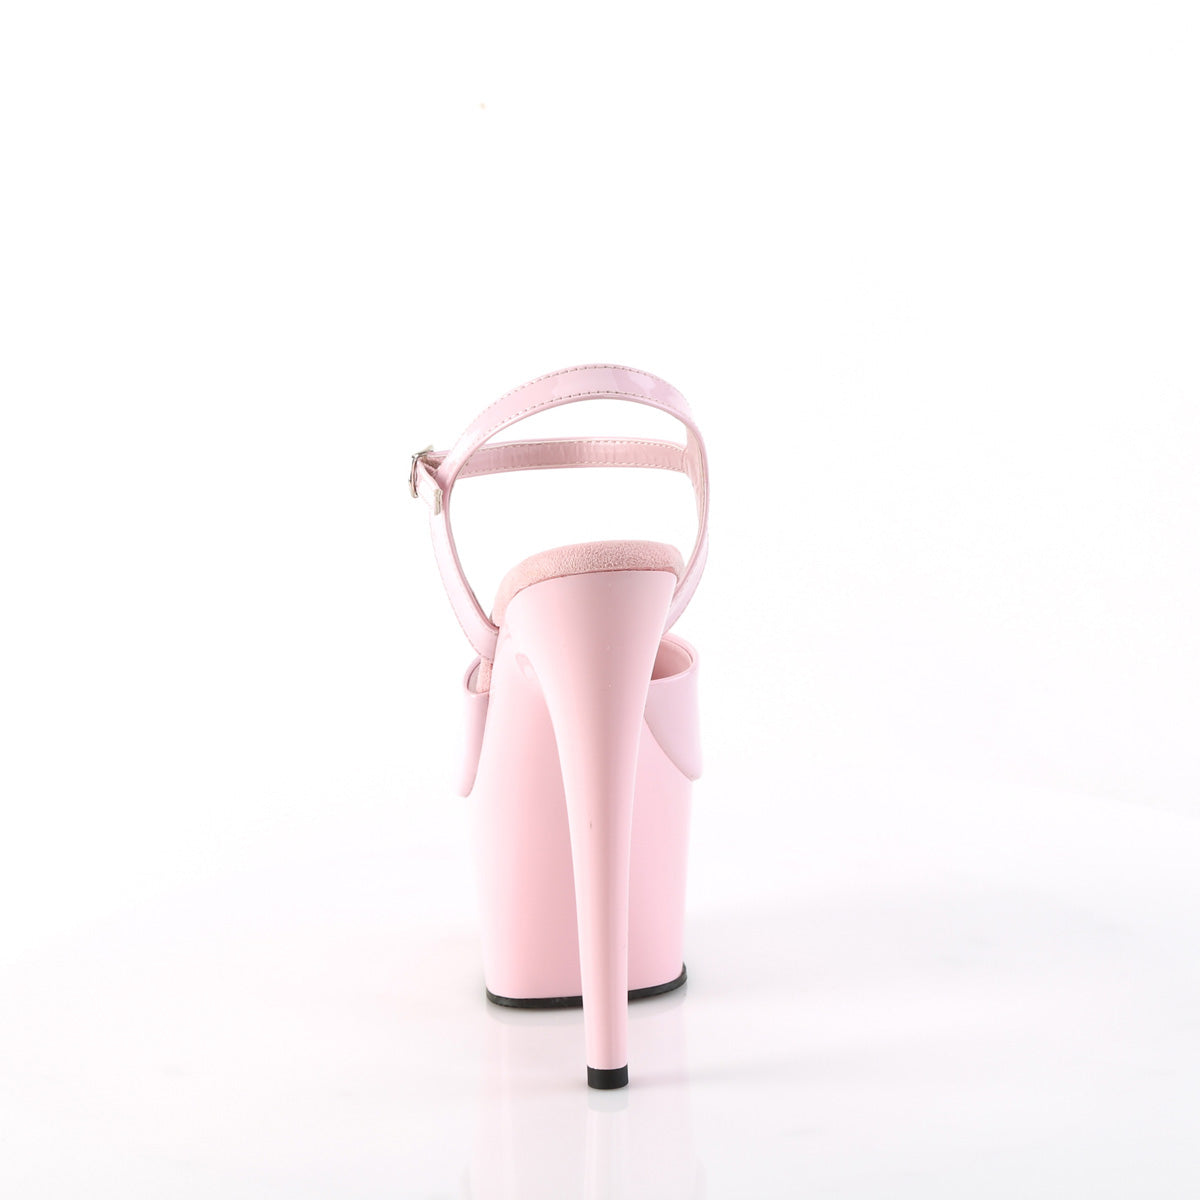 7 Inch Heel ADORE-709 Baby Pink Patent